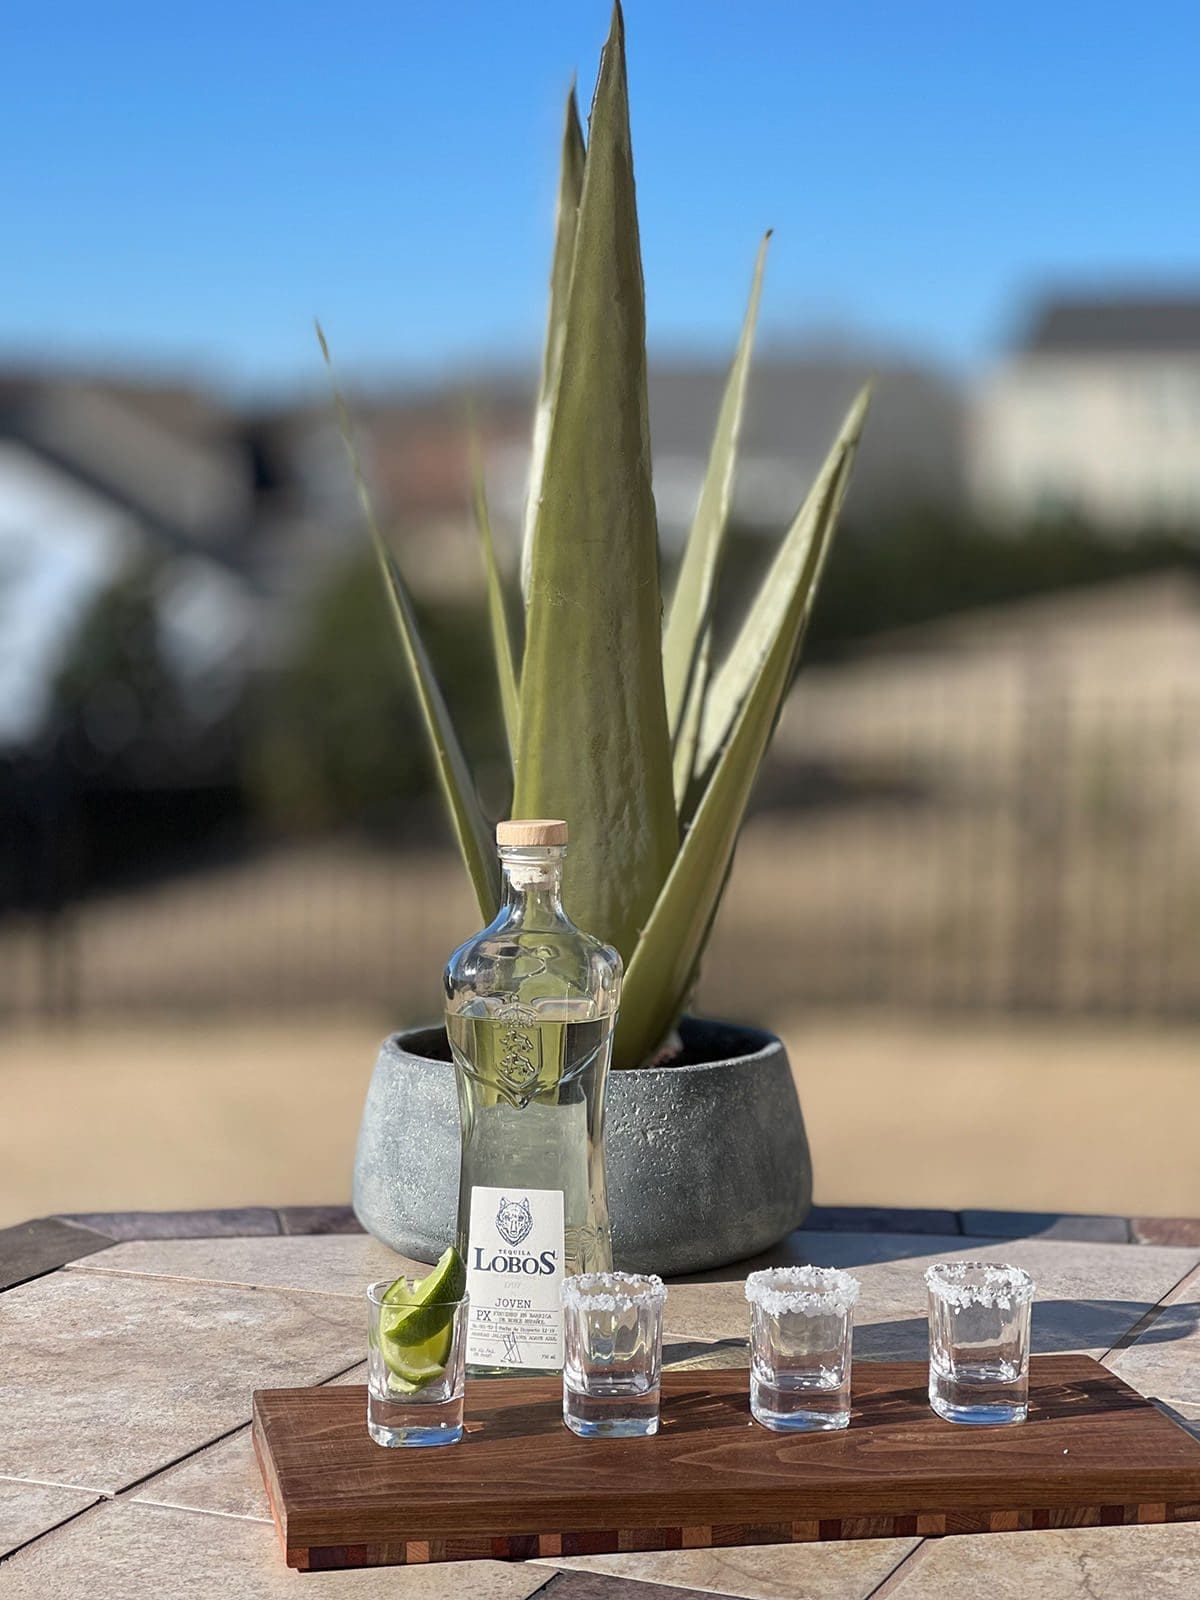 4 shots of white tequila on a wood cutting board. A cactus plant and bottle of tequila are in the background.